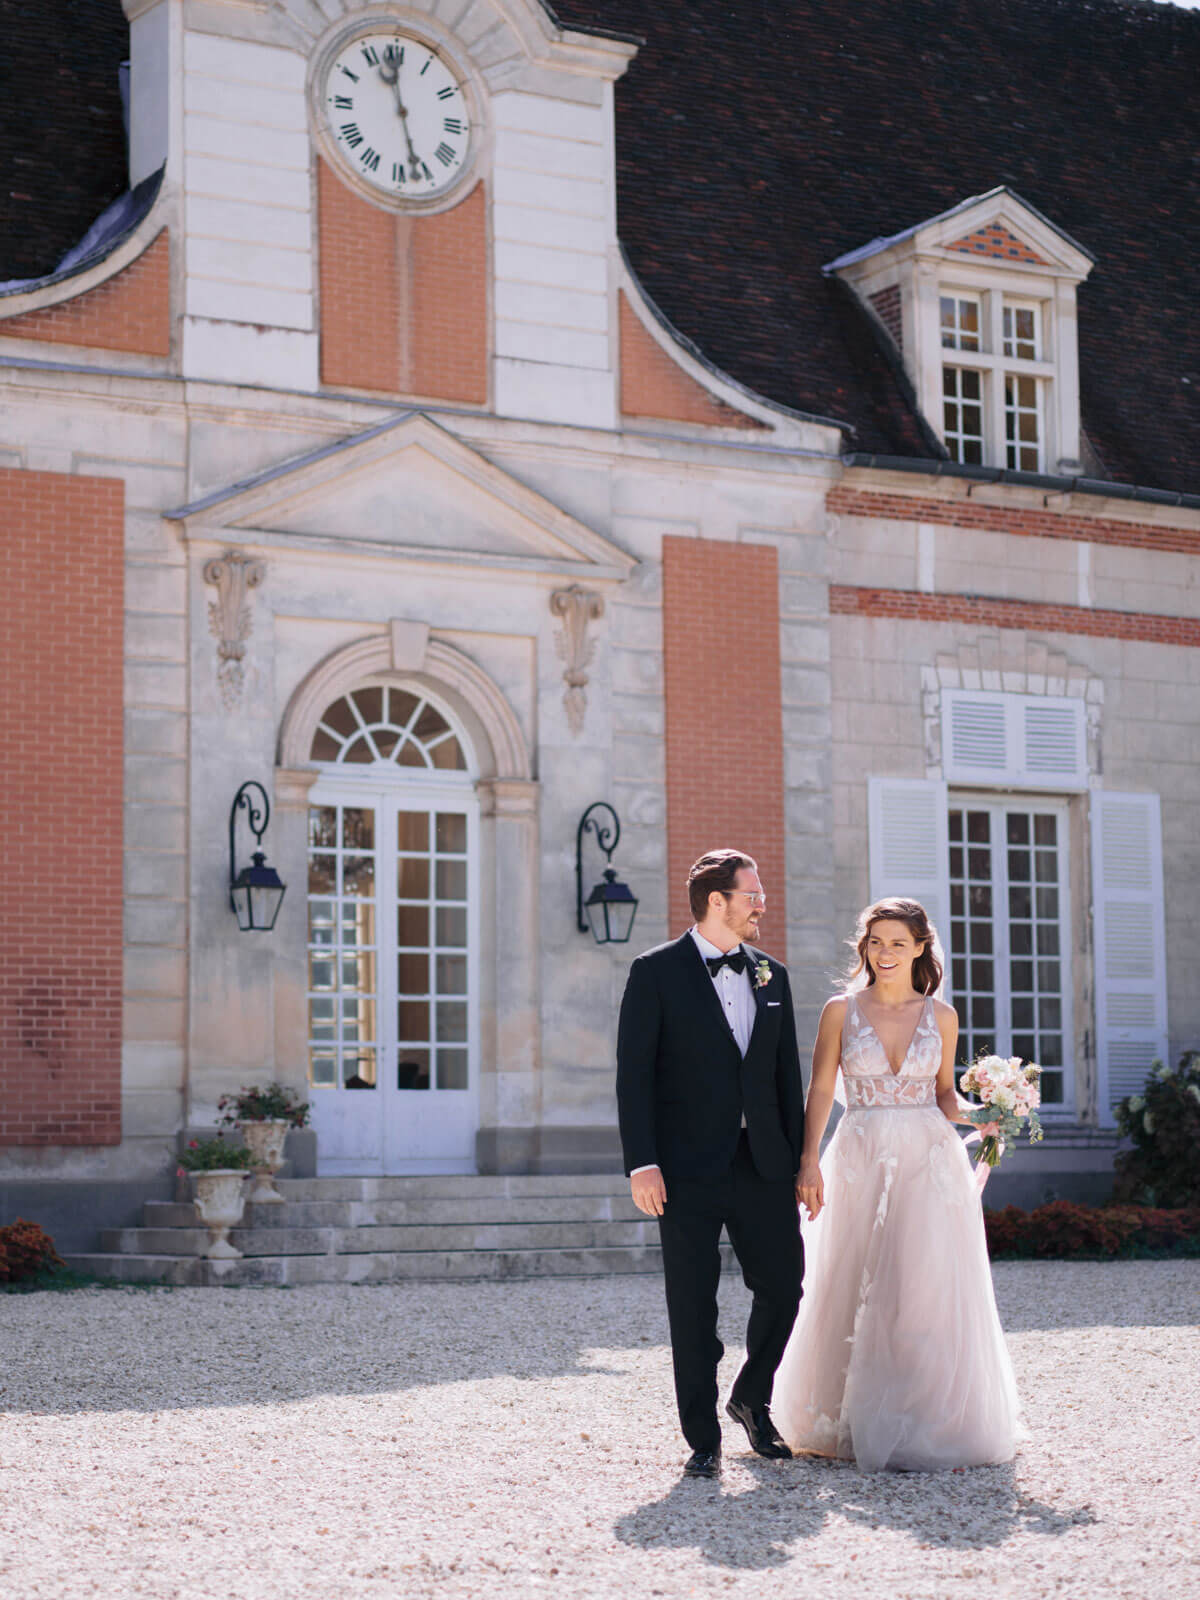 The bride and groom are walking in front of a chateau in France. Image by Destination Wedding Photographer Jenny Fu